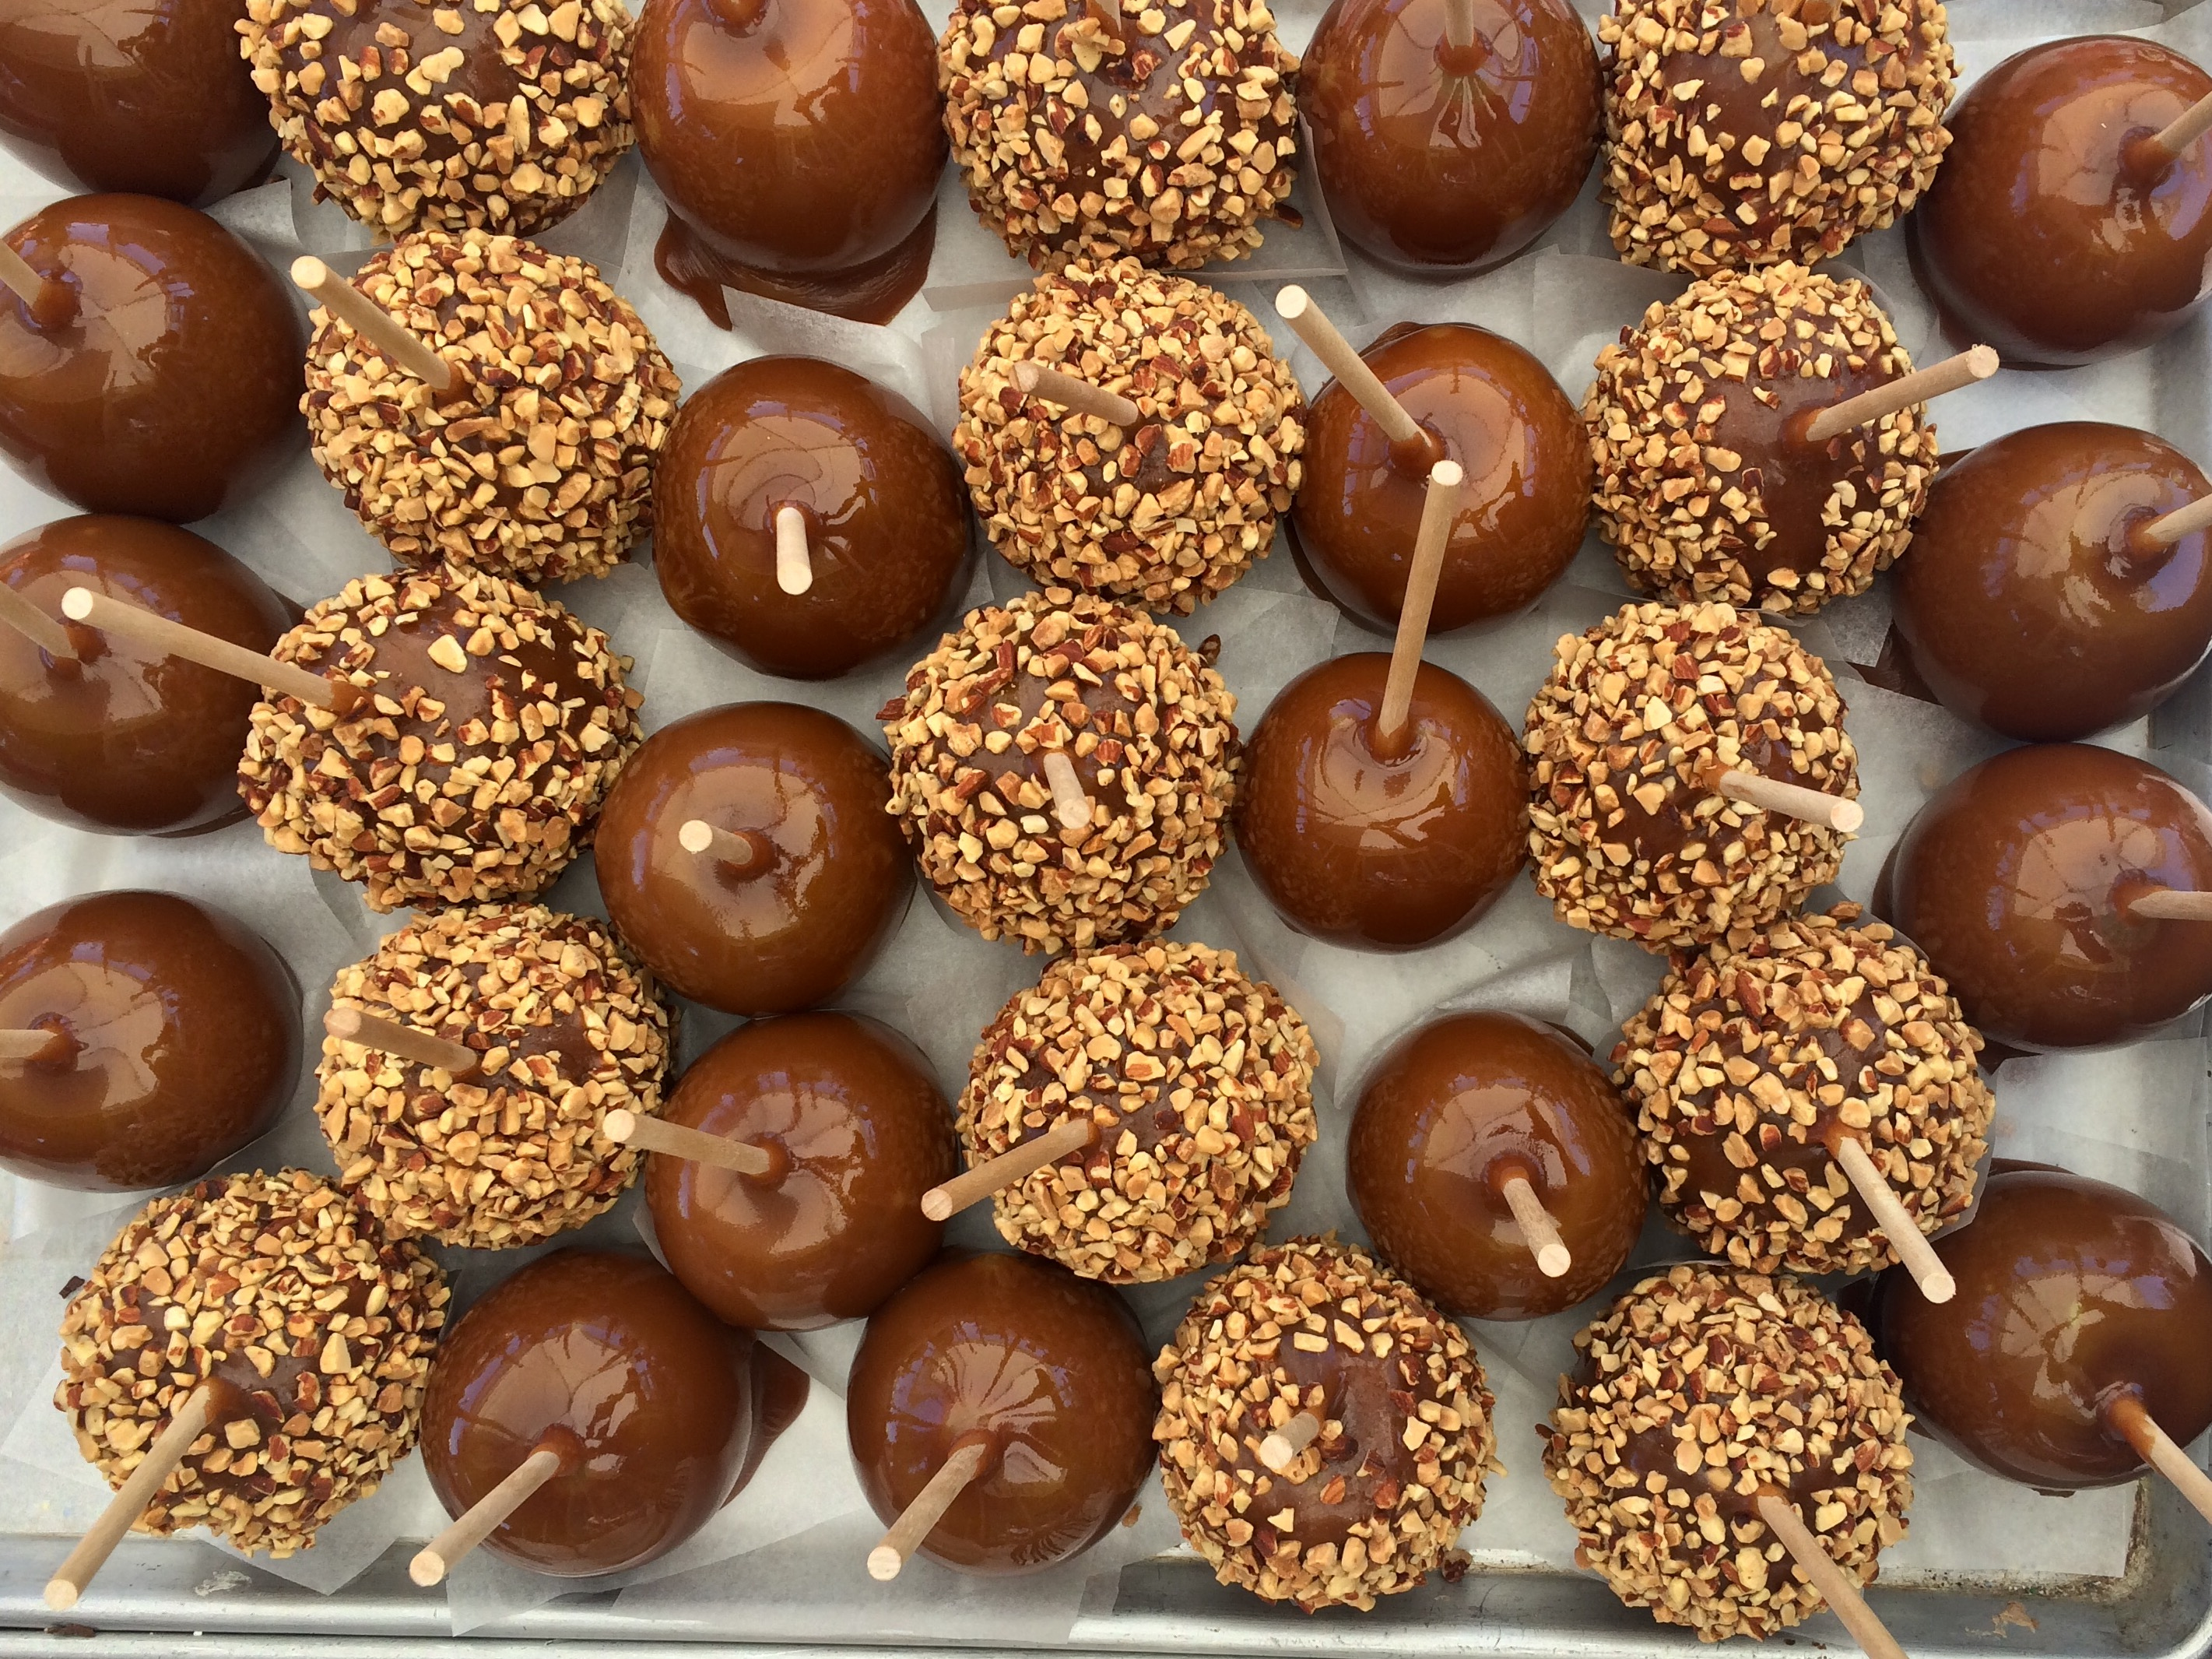 <p>For an apple treat that is extra sweet — albeit a bit messy to eat — <a href="http://shewearsmanyhats.com/chocolate-caramel-apples/">try this recipe from She Wears Many Hats.</a></p><p><a href='https://www.msn.com/en-us/community/channel/vid-cj9pqbr0vn9in2b6ddcd8sfgpfq6x6utp44fssrv6mc2gtybw0us'>Follow us on MSN to see more of our exclusive lifestyle content.</a></p>